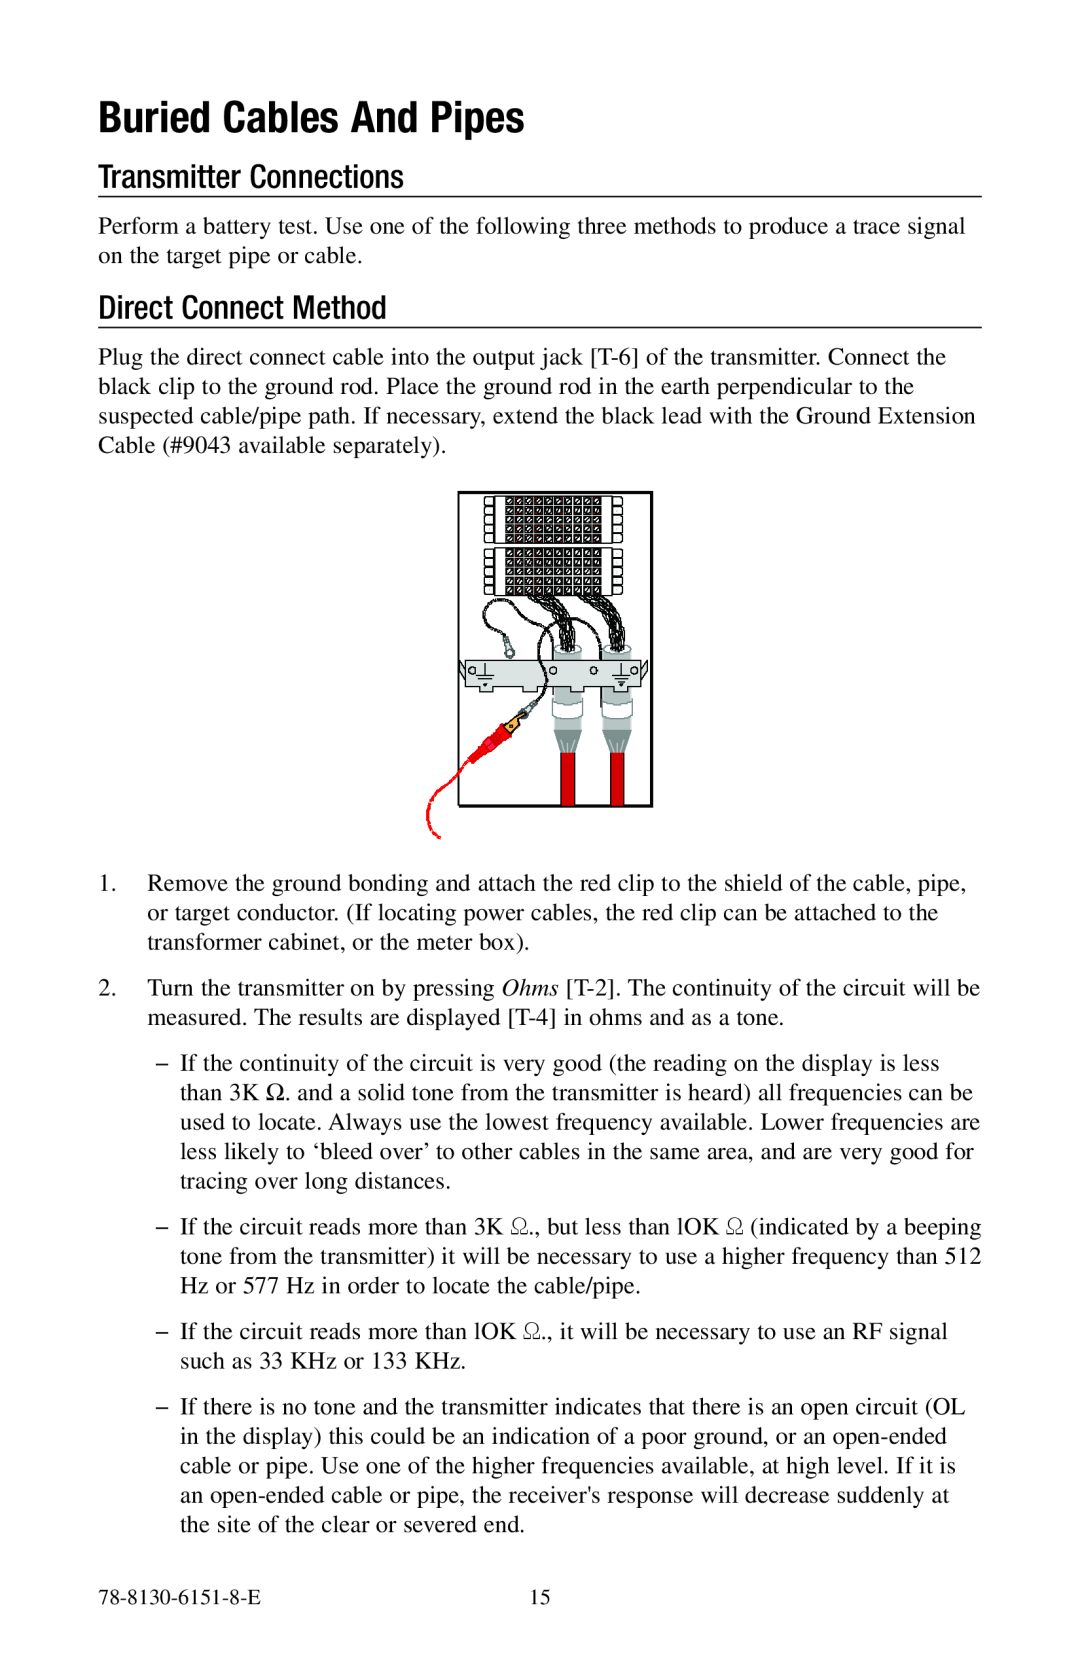 3M 2273ME-iD, 2250ME-iD manual Buried Cables And Pipes, Transmitter Connections, Direct Connect Method 